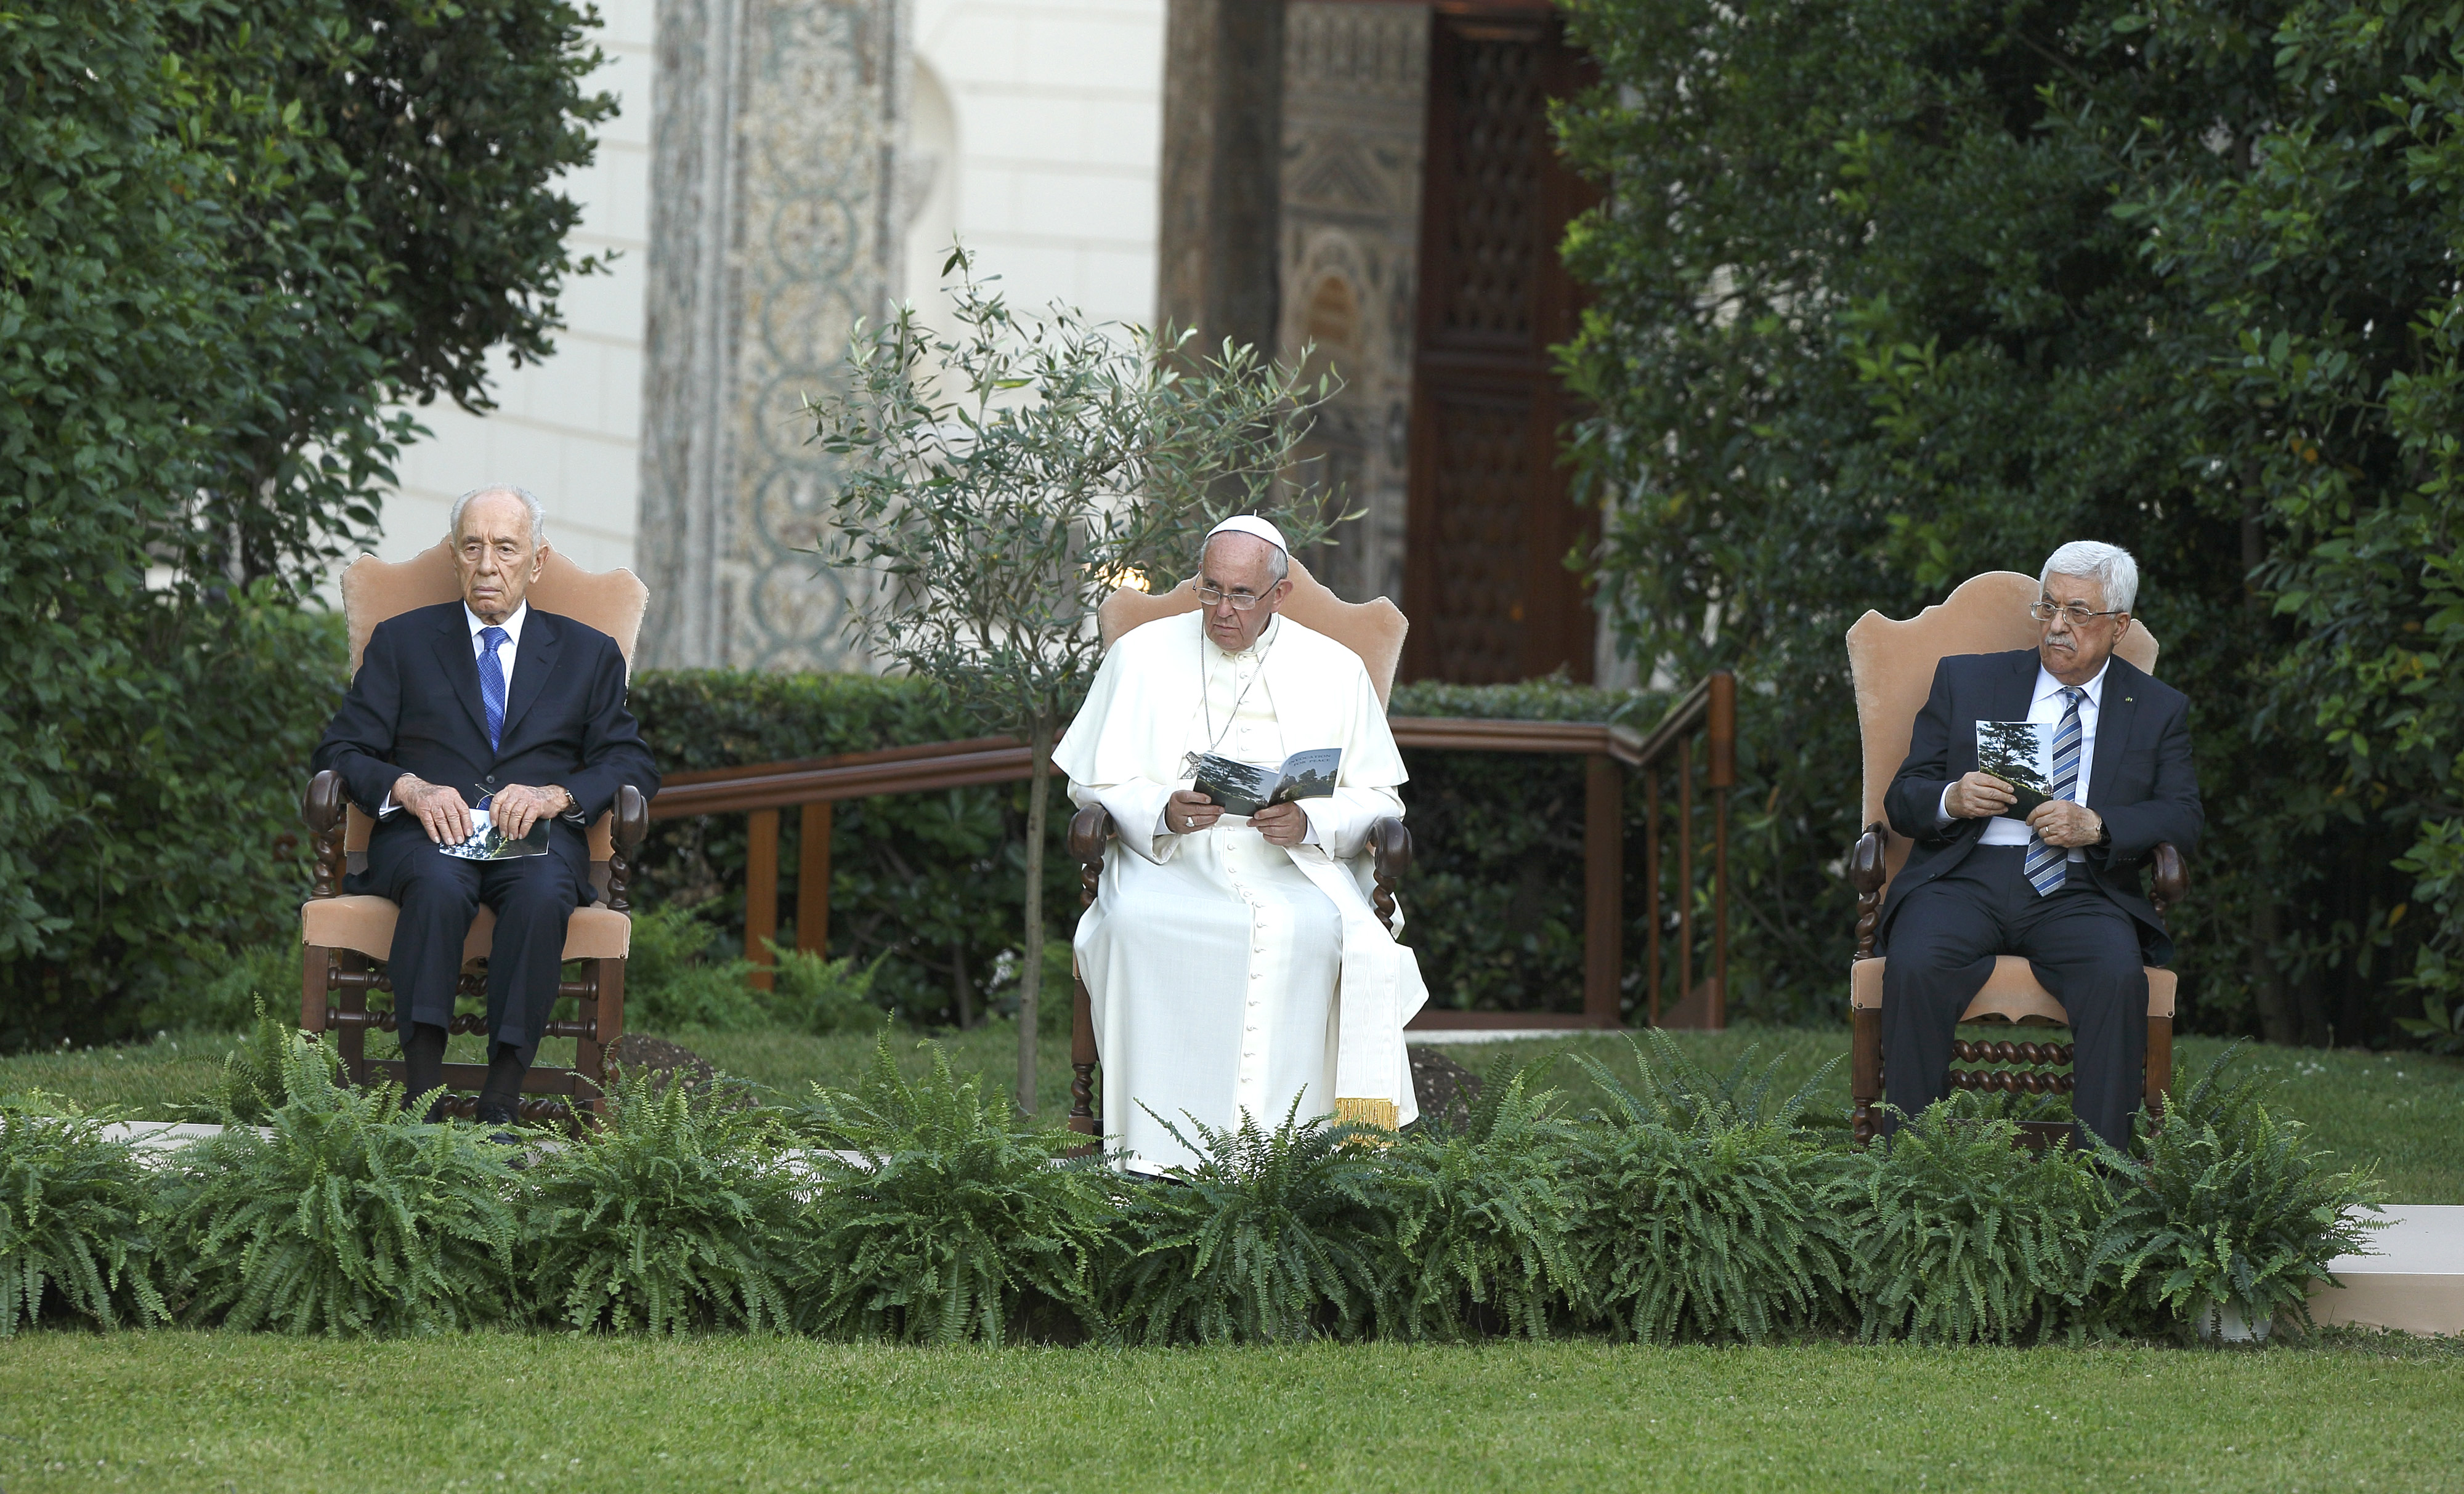 Israeli President Shimon Peres, Pope Francis and Palestinian President Mahmoud Abbas attend an invocation for peace in the Vatican Gardens in this June 8, 2014 file photo. (CNS photo/Paul Haring)